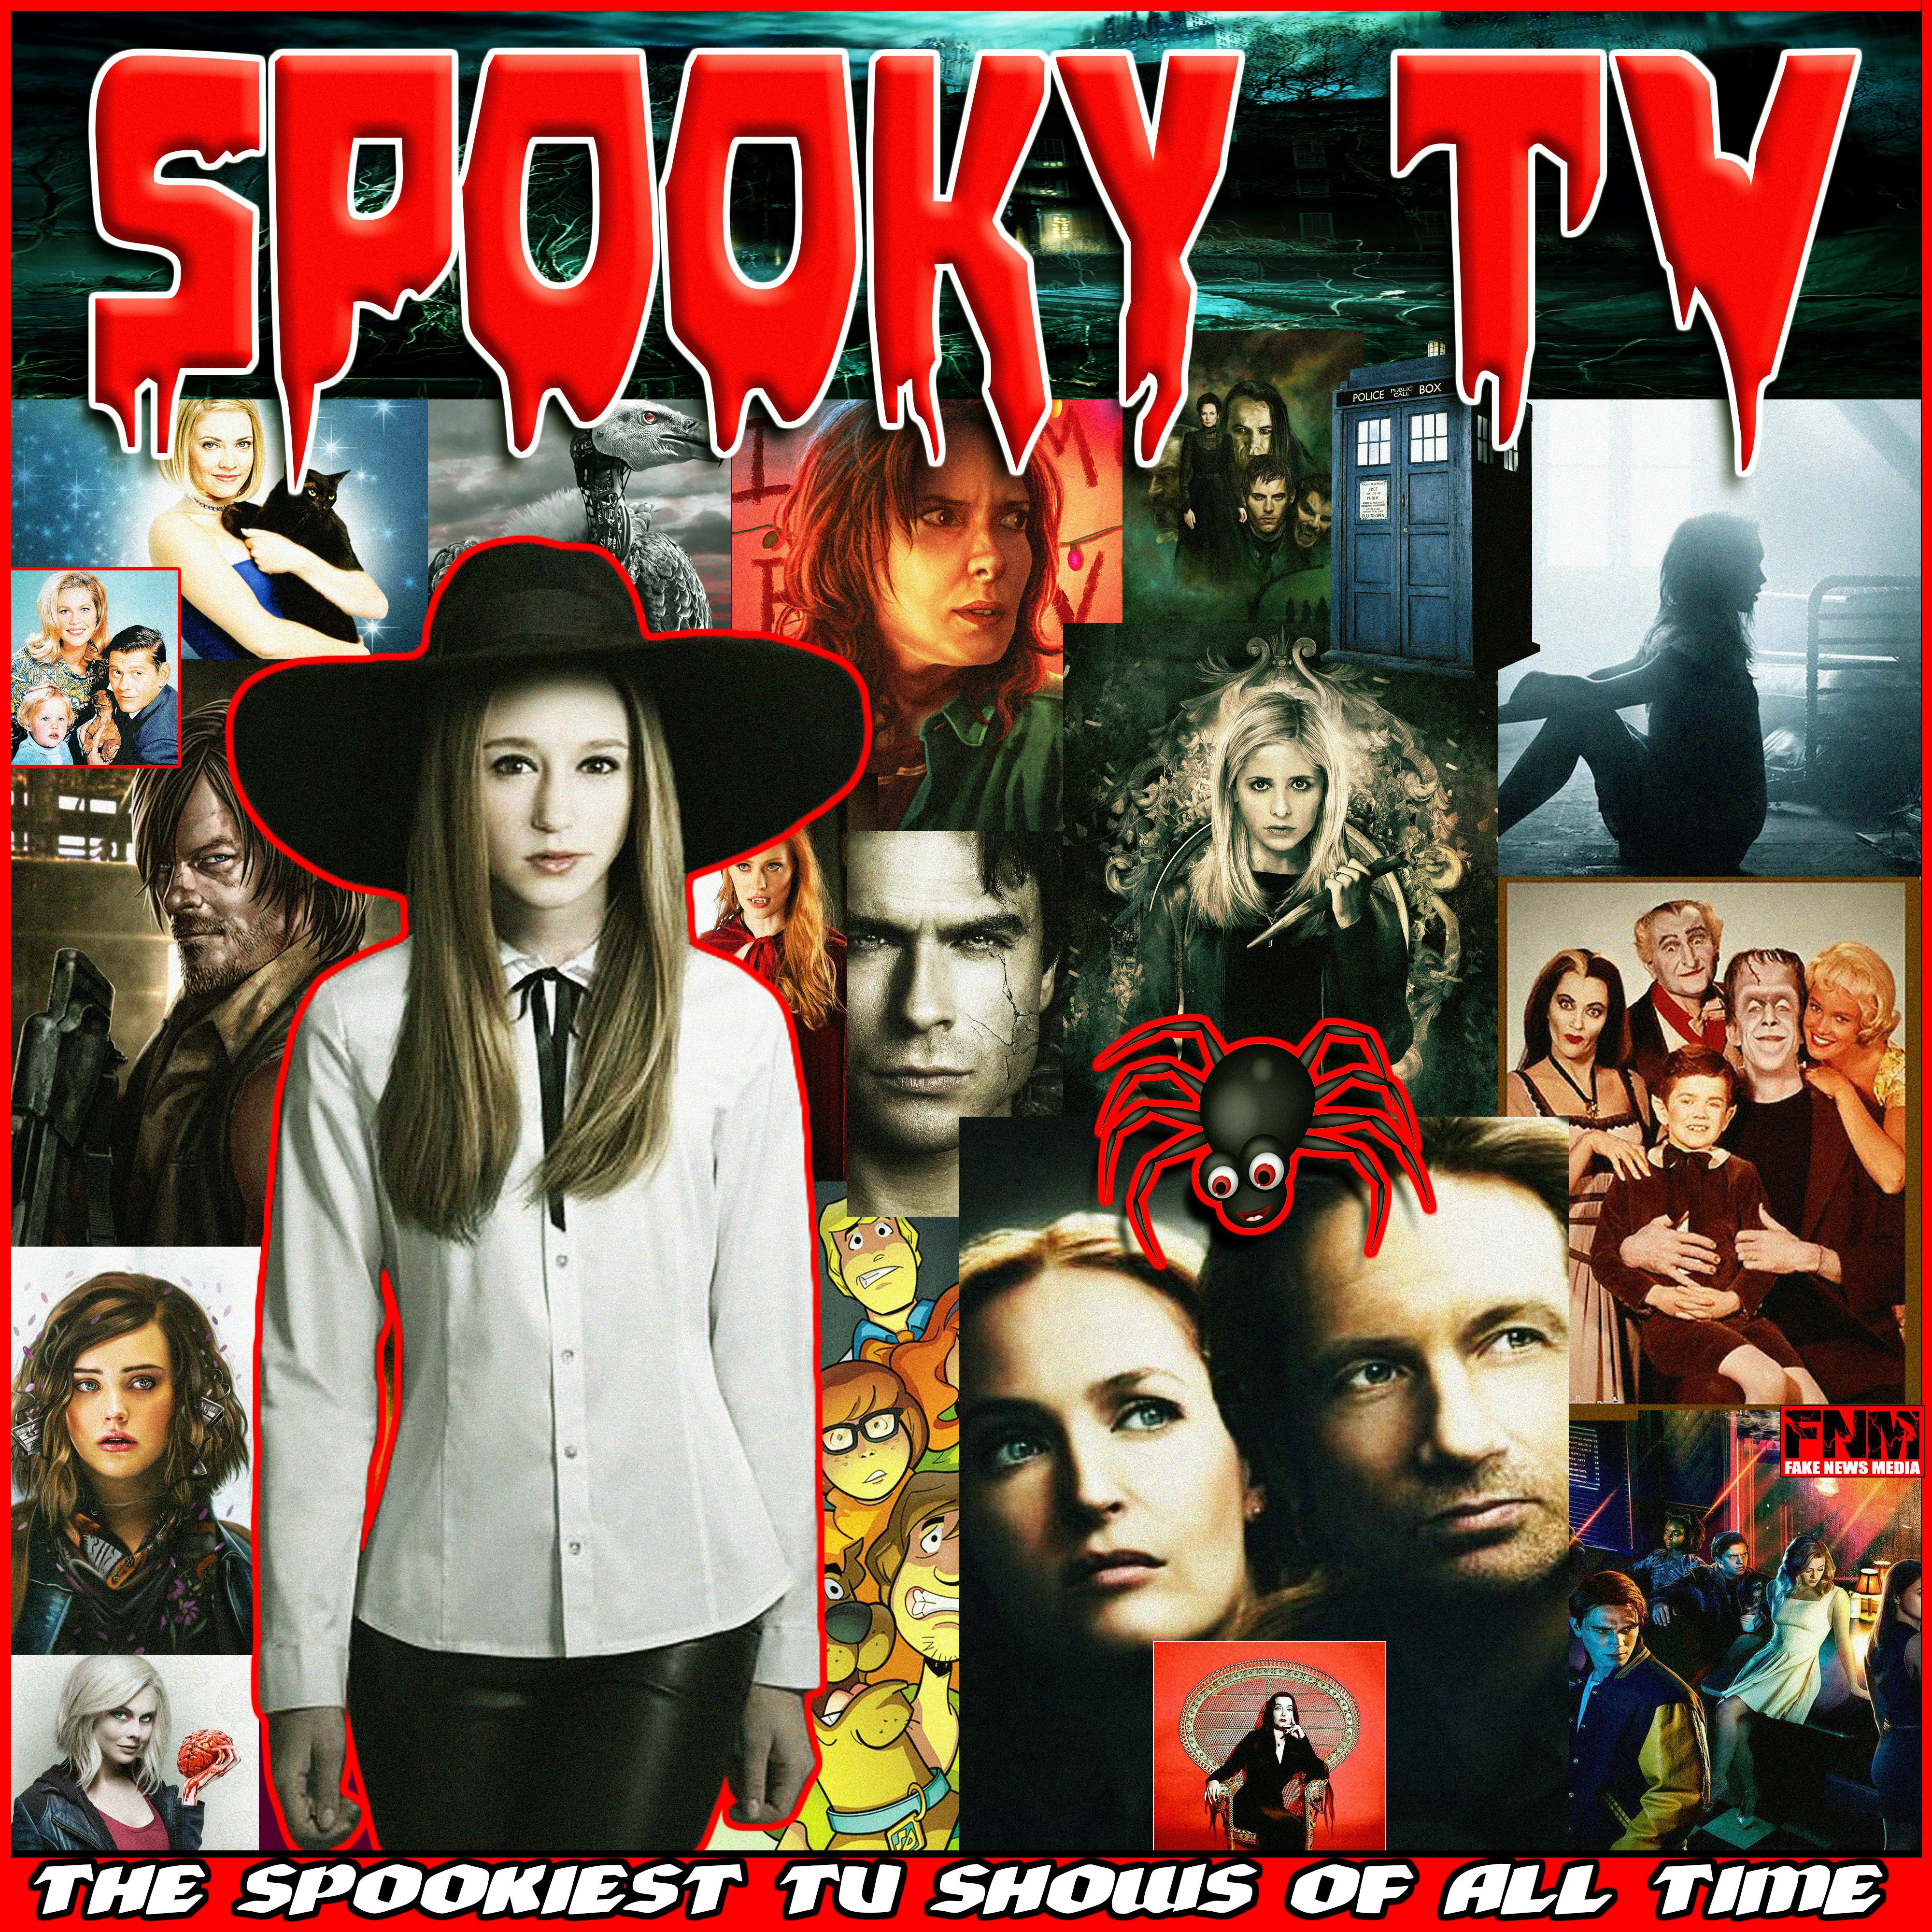 Spooky TV - The Spookiest TV Shows of All Time